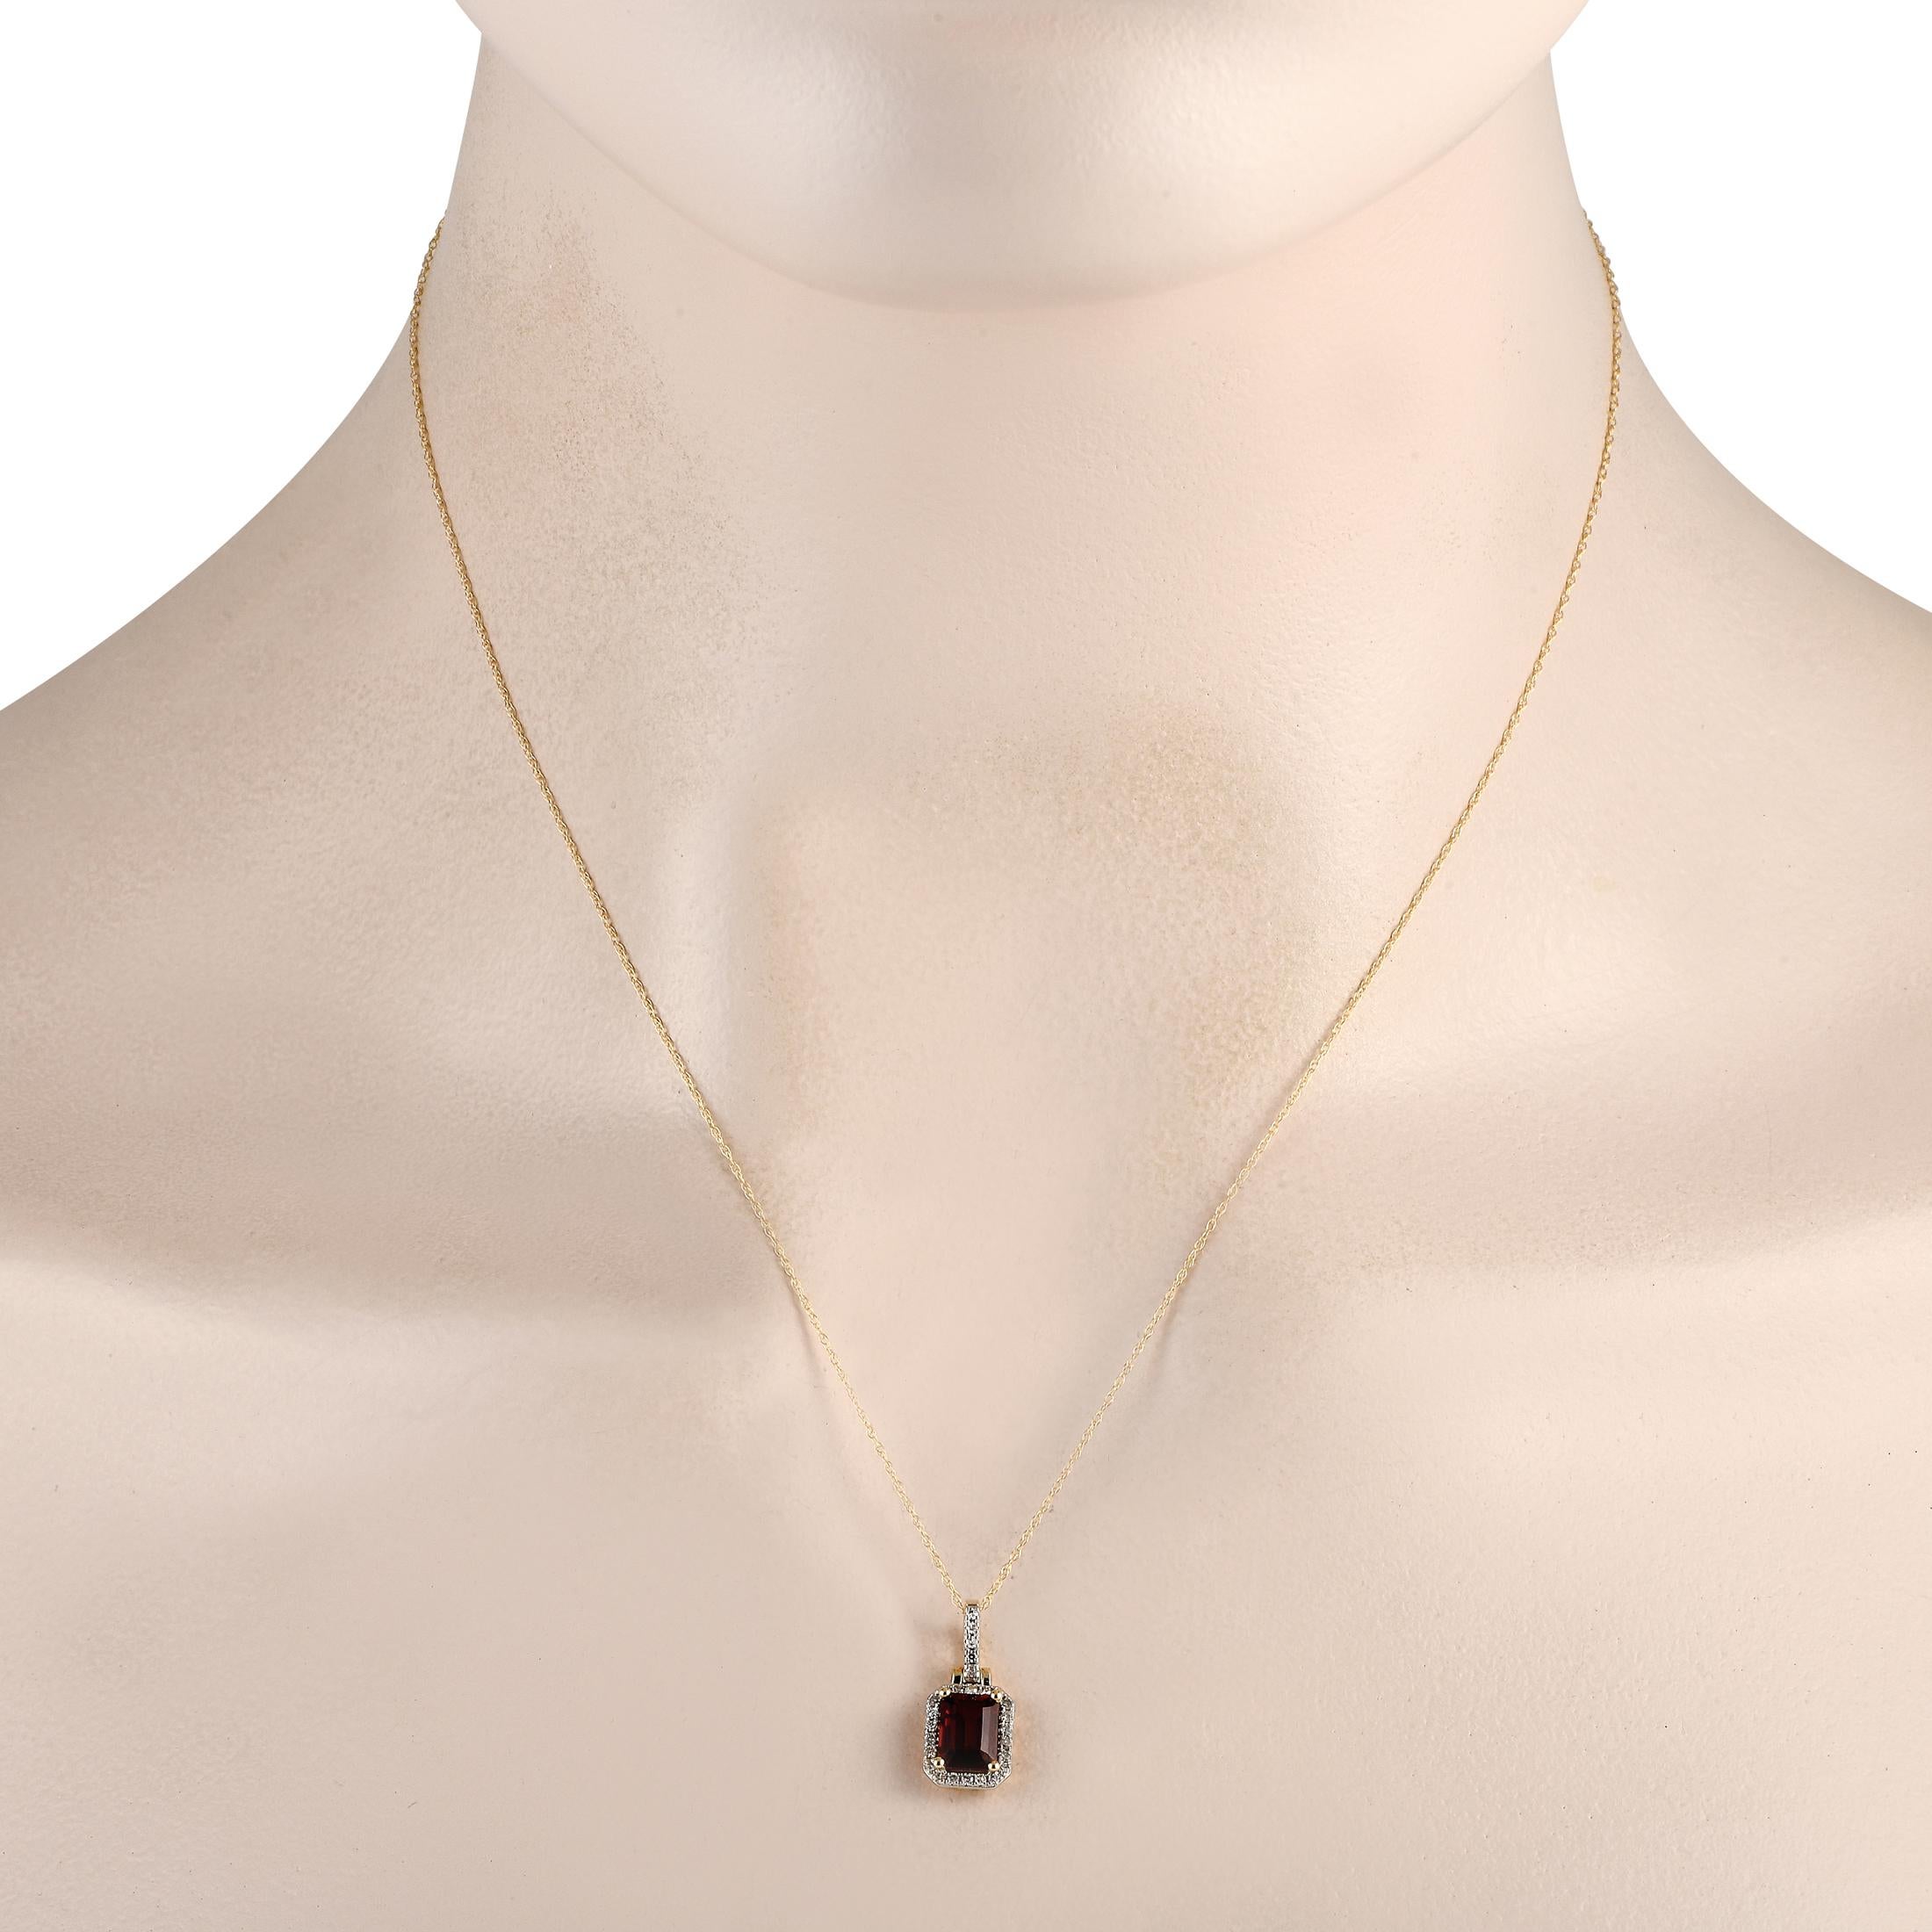 This luxury necklace is truly timeless in design. Crafted from 14K Yellow Gold, it features a pendant measuring 0.65 long by 0.30 wide suspended from an 18 chain. It includes a striking Garnet center stone and Diamond accents totaling 0.12